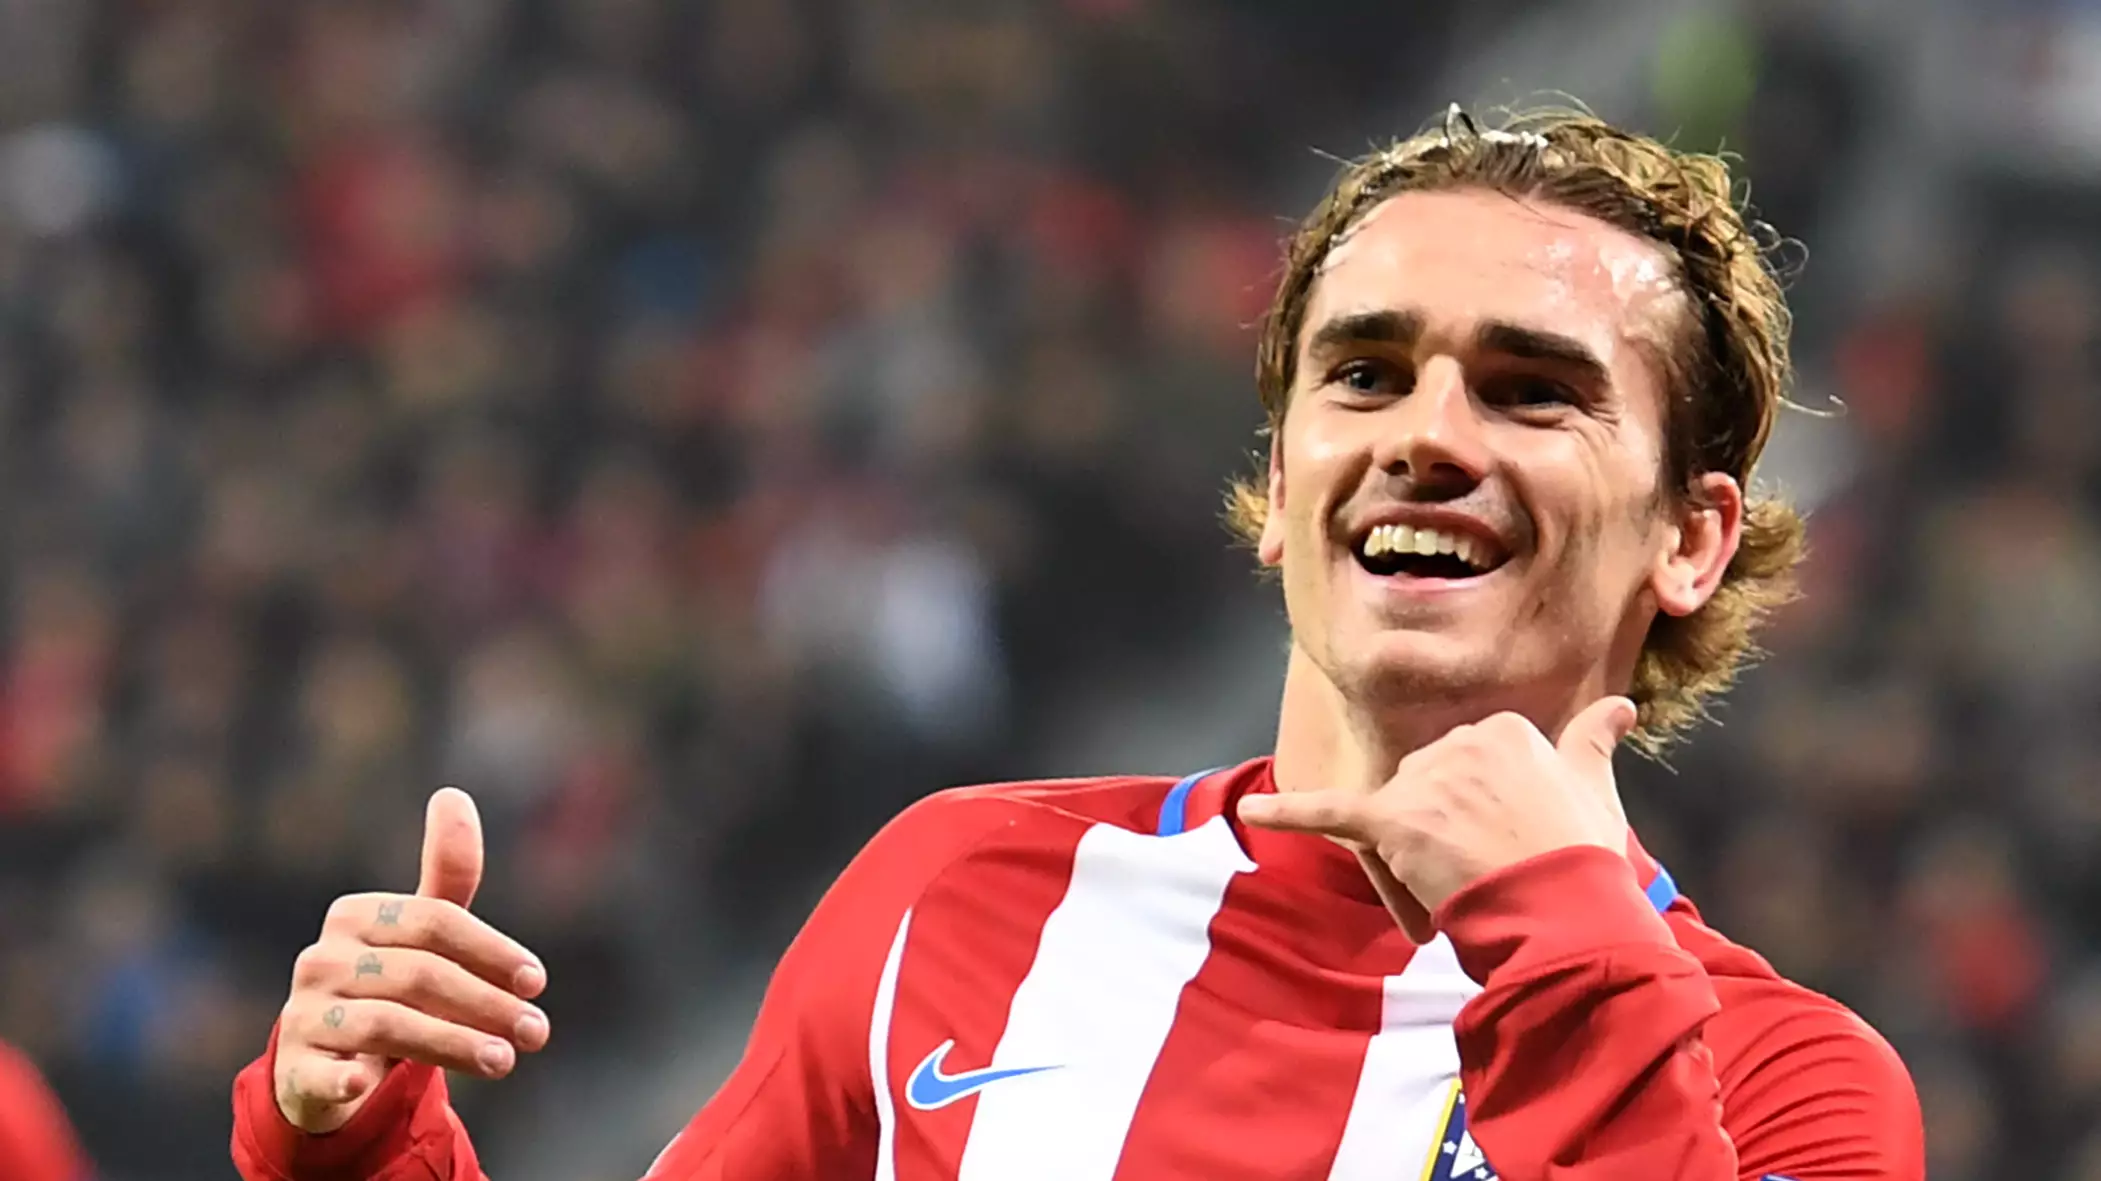 Griezmann was the top star at Sociedad and Atletico. Image: PA Images